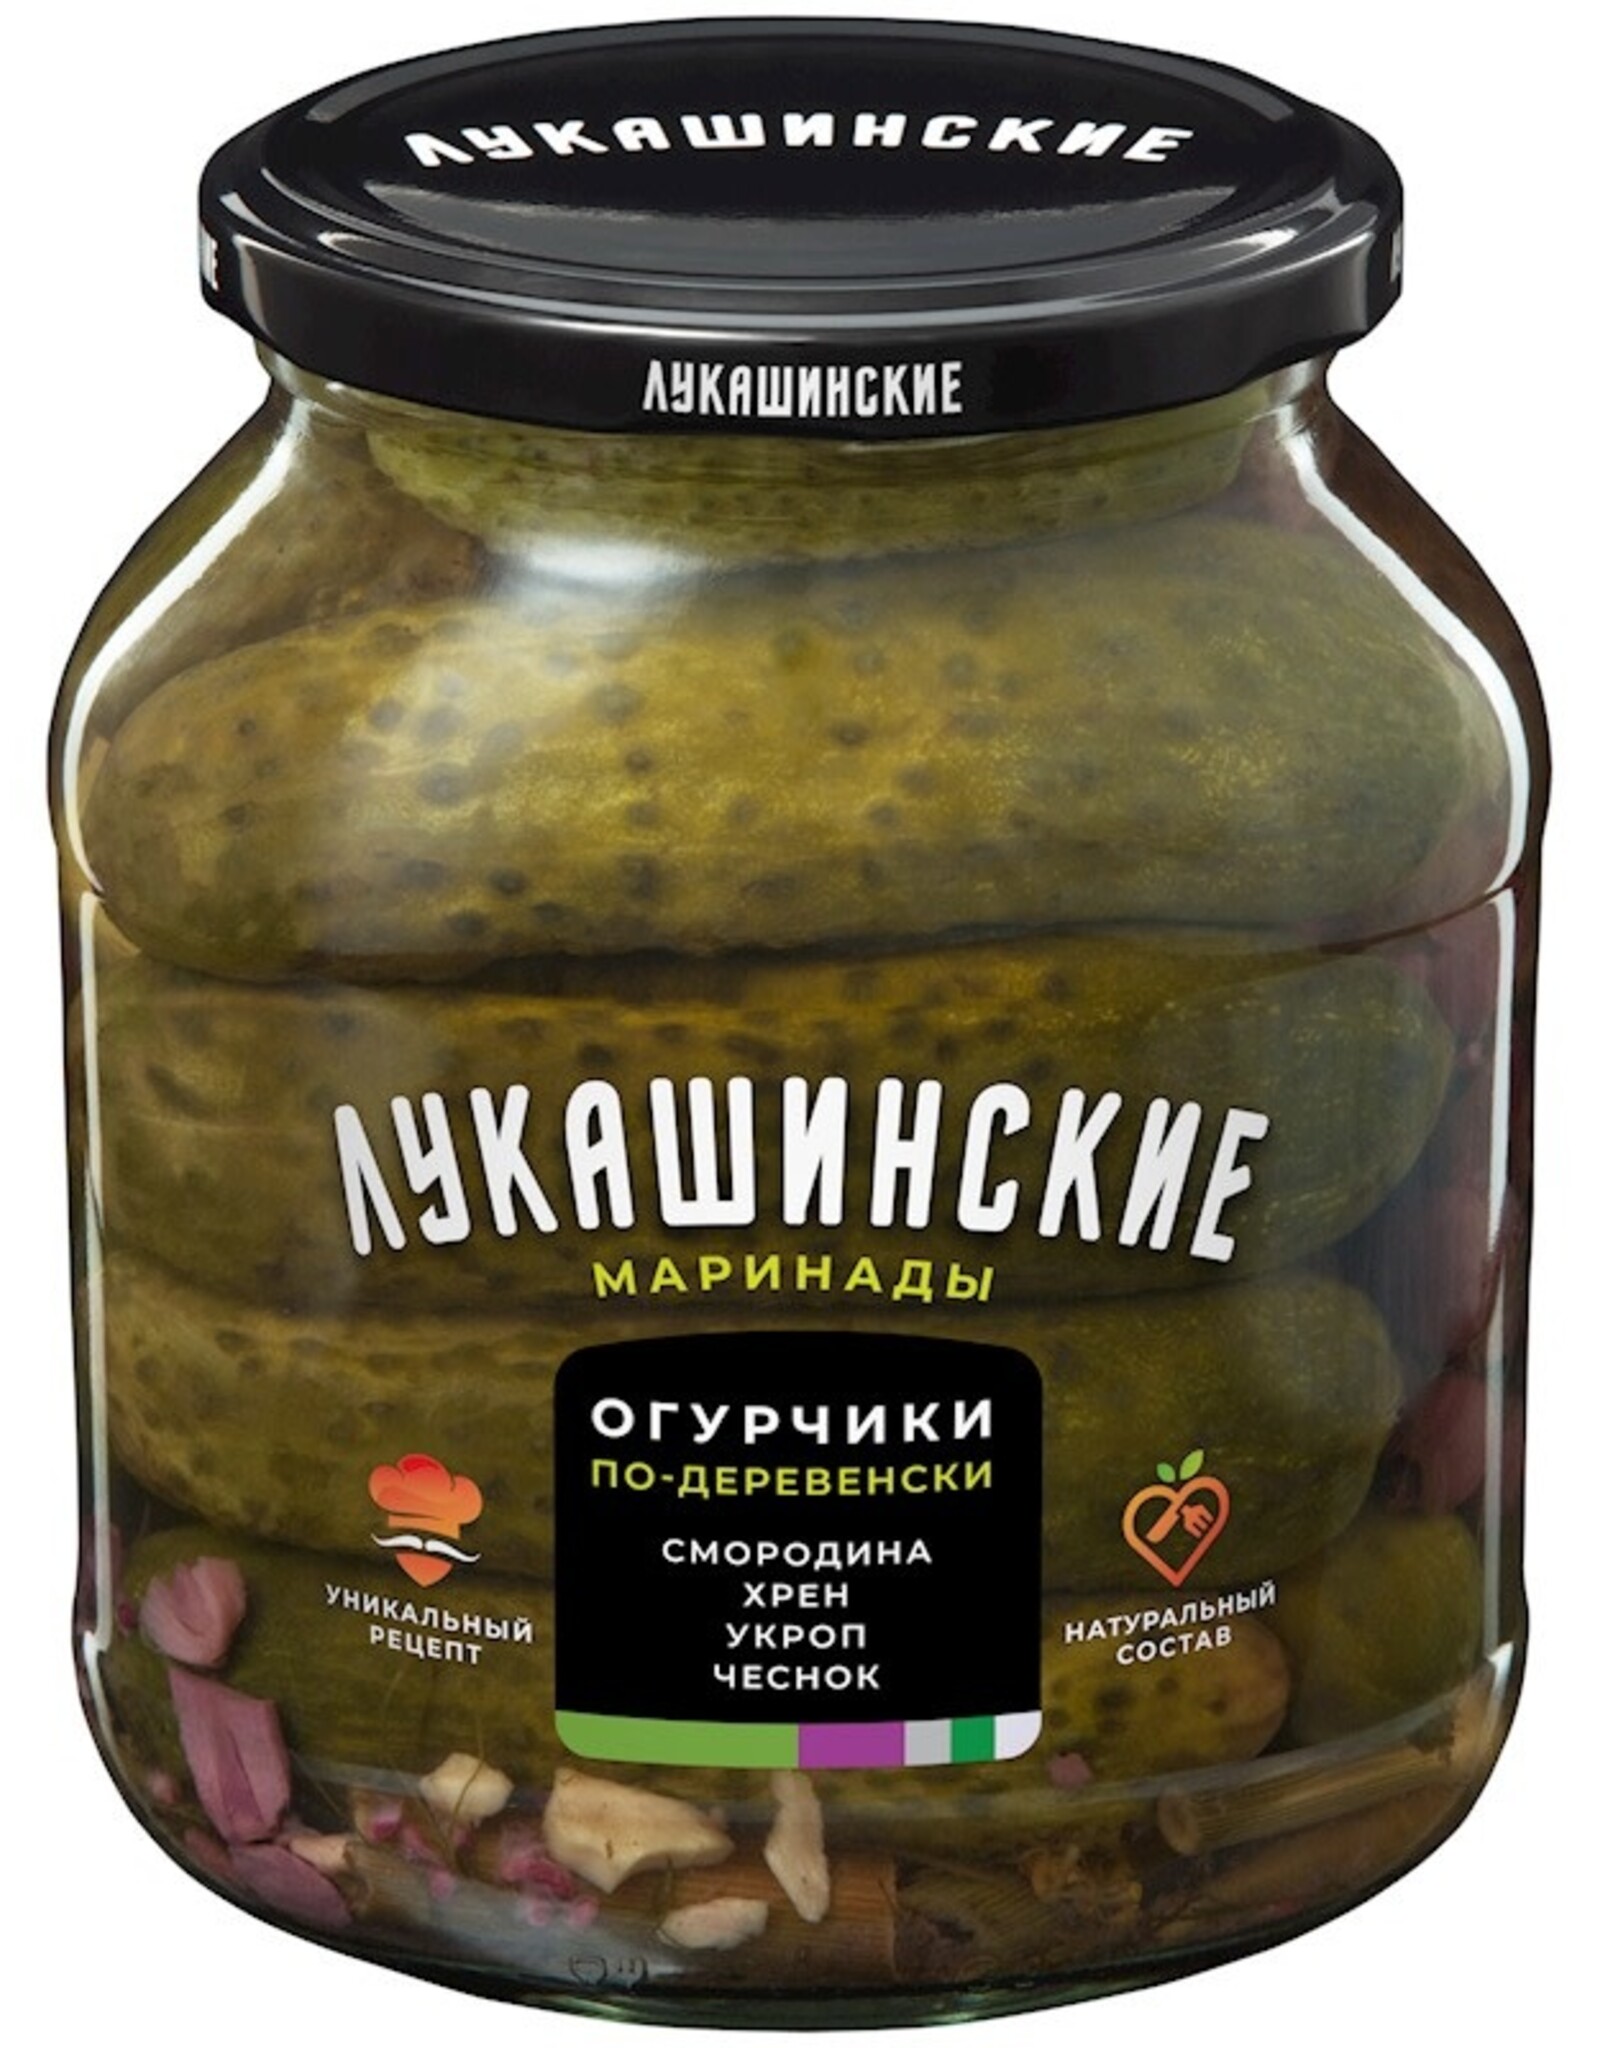 Village Style Pickles with Horseradish & Black Currant